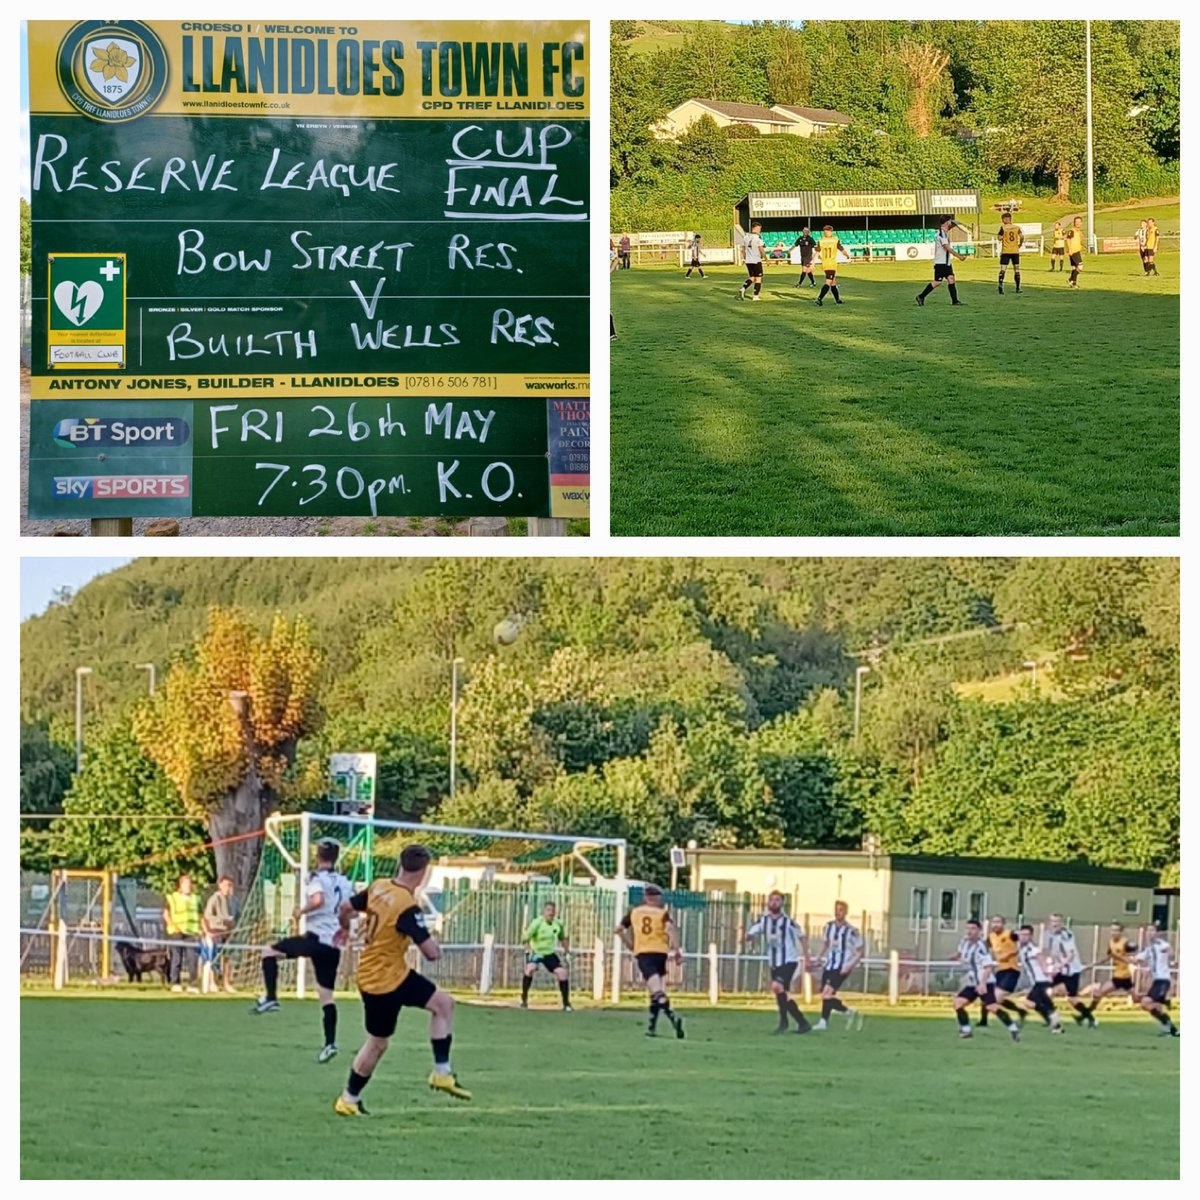 +184.Victoria Park,@LlaniTownfc for #FAWReserveLeagueCentral #CupFinal, a fairly even and  entertaining contest, with no quarter given or taken FT @BowStreetFC 2 @BuilthWellsFC 2. Both teams ended the game with 10 men. Pens 5-6. #groundhopping @HoppersGuide #grassrootsfootball